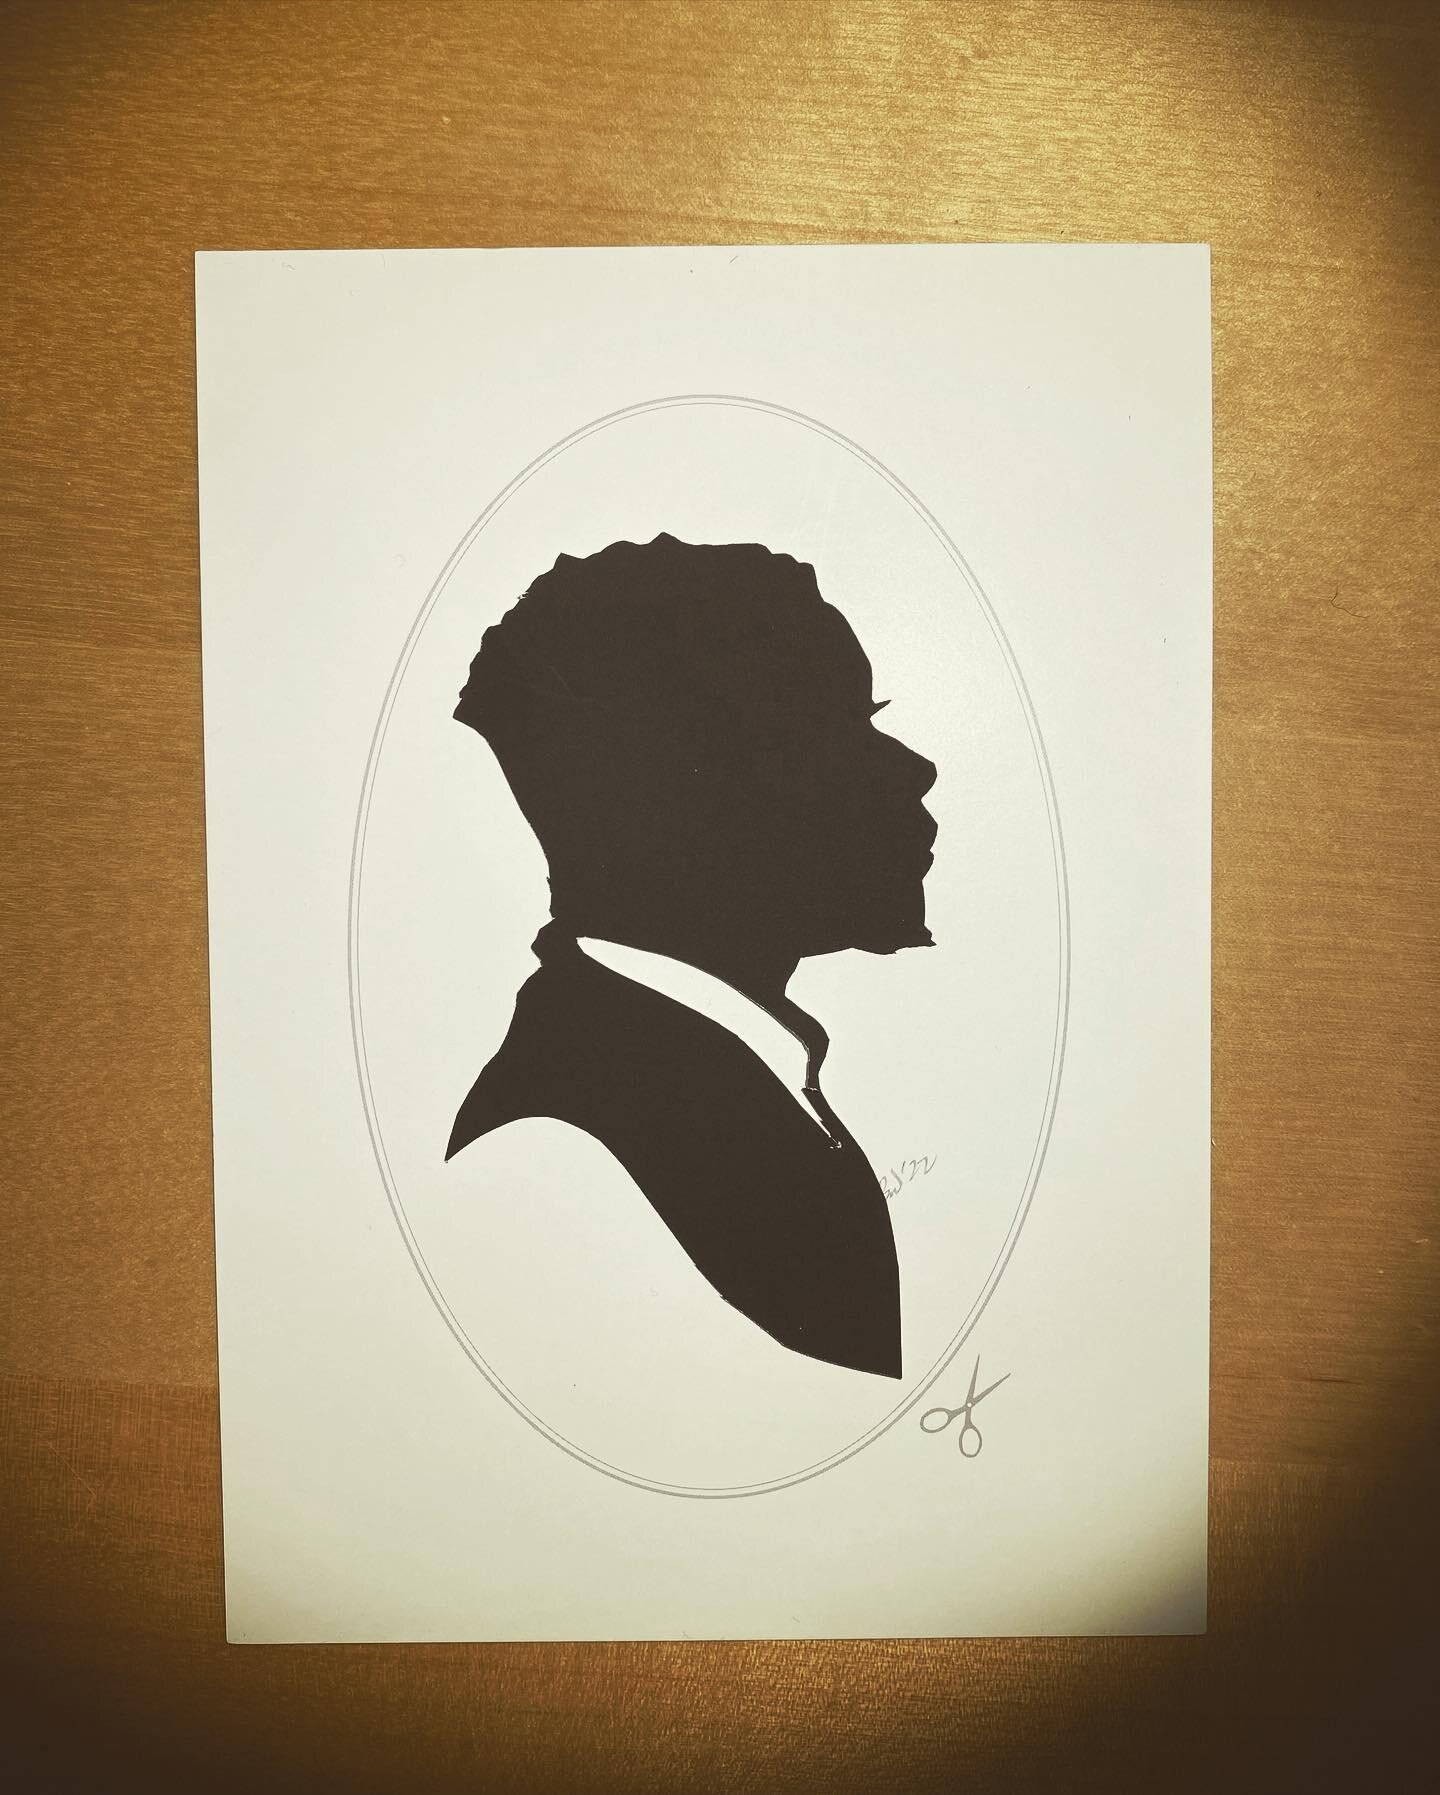 Let's hear it for the gentlemen... who look stunning in classic hand-✂️silhouettes from the smashing @njimedia event 🧨 in DC last night at @kreegermuseum ! 
.
(I have the ladies' portraits too, but these were so stunning, with such great souls as th